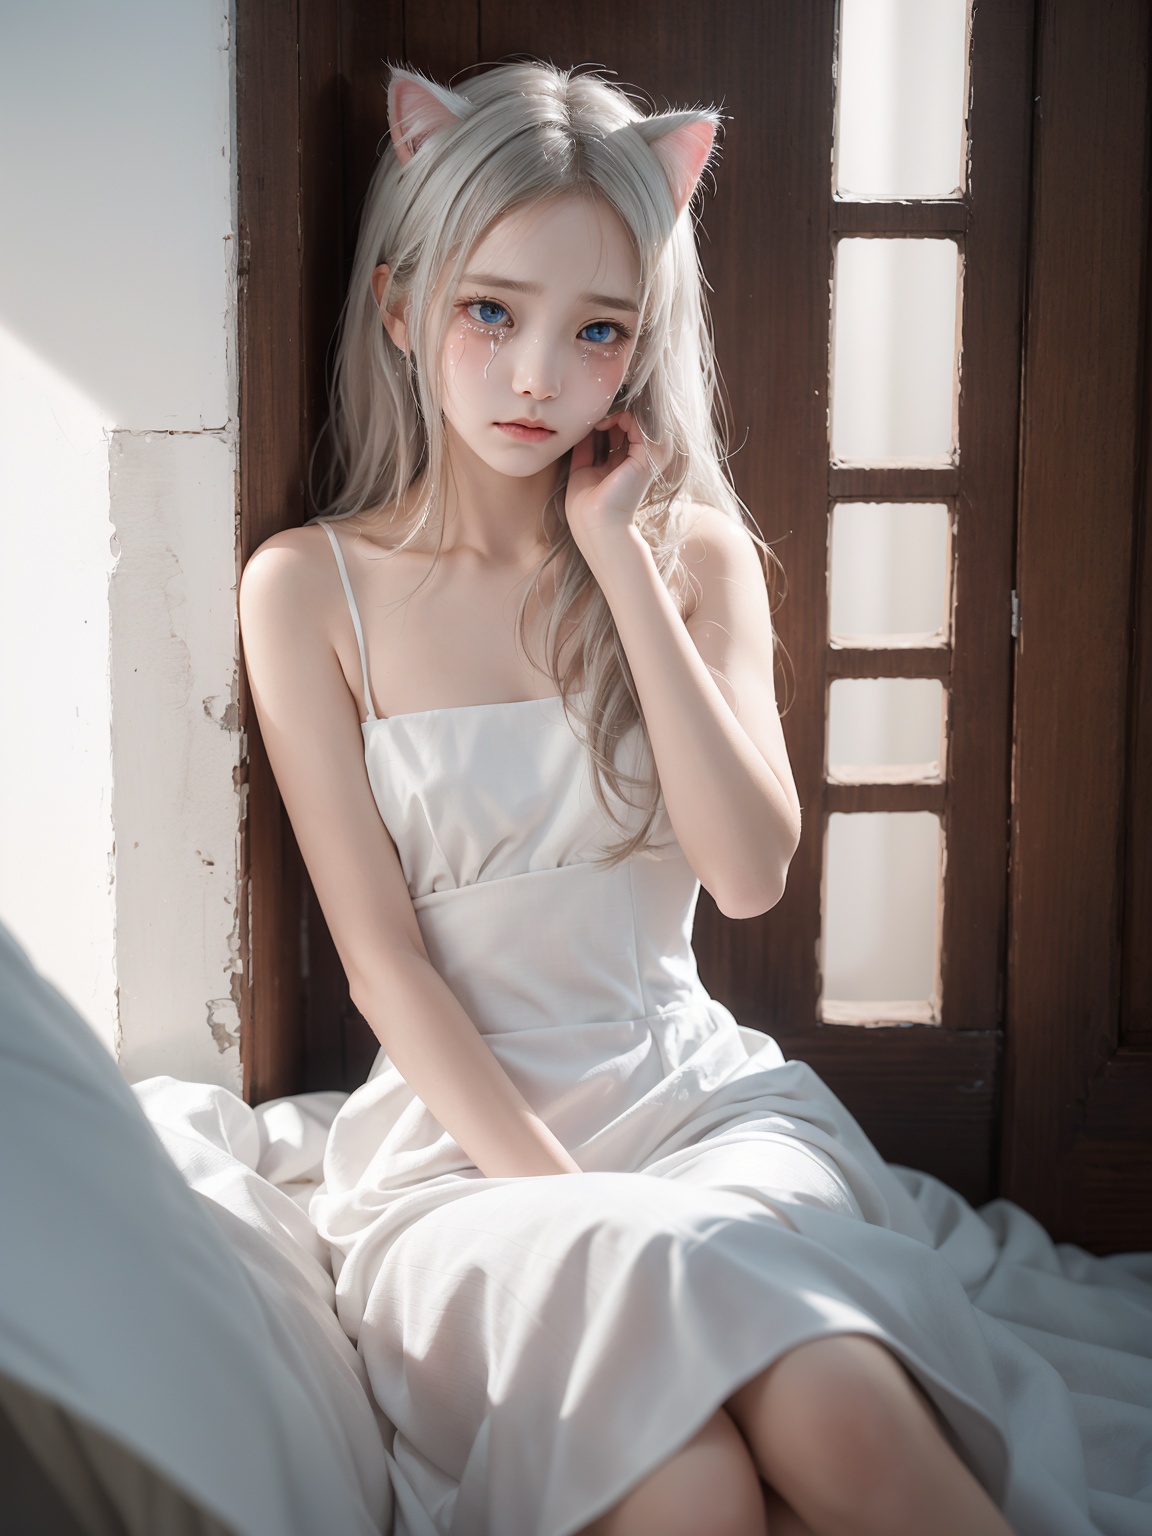 (aesthetic, digital art),a digital illustration of a cat-girl with long white hair,dressed in a white dress,huddled in a corner and crying,(anime style:1.2),teary-eyed expression,(cat ears:1.2),adorable and vulnerable features,(emotional:1.1),heart-wrenching atmosphere,(white dress:1.2),flowing fabric accentuating her delicate figure,(loneliness:1.3),isolated and desolate setting,(sadness:1.2),tears streaming down her face,(empathy:1.1),evoking a sense of compassion,(corner:1.3),curled up in a small space,(hair covering face:1.2),concealing her emotions,(subtle lighting:1.1),soft and muted colors,(emotional storytelling:1.2),capturing a moment of vulnerability and sadness.,ears down,blue eyes,eyesseye,